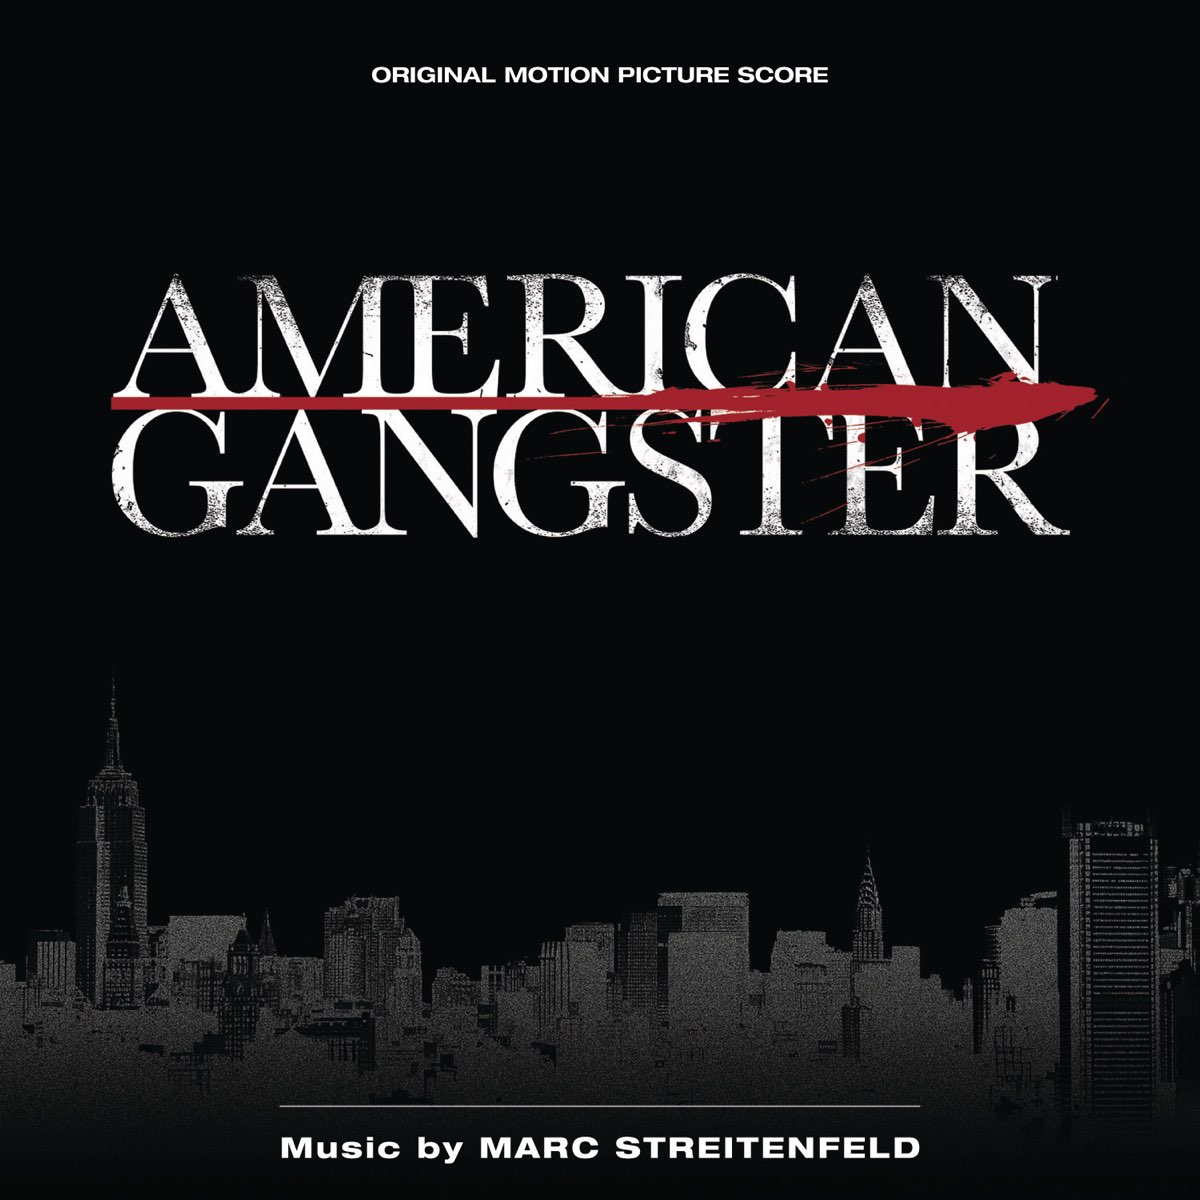 American Gangster (Original Motion Picture Score) - Album by Marc